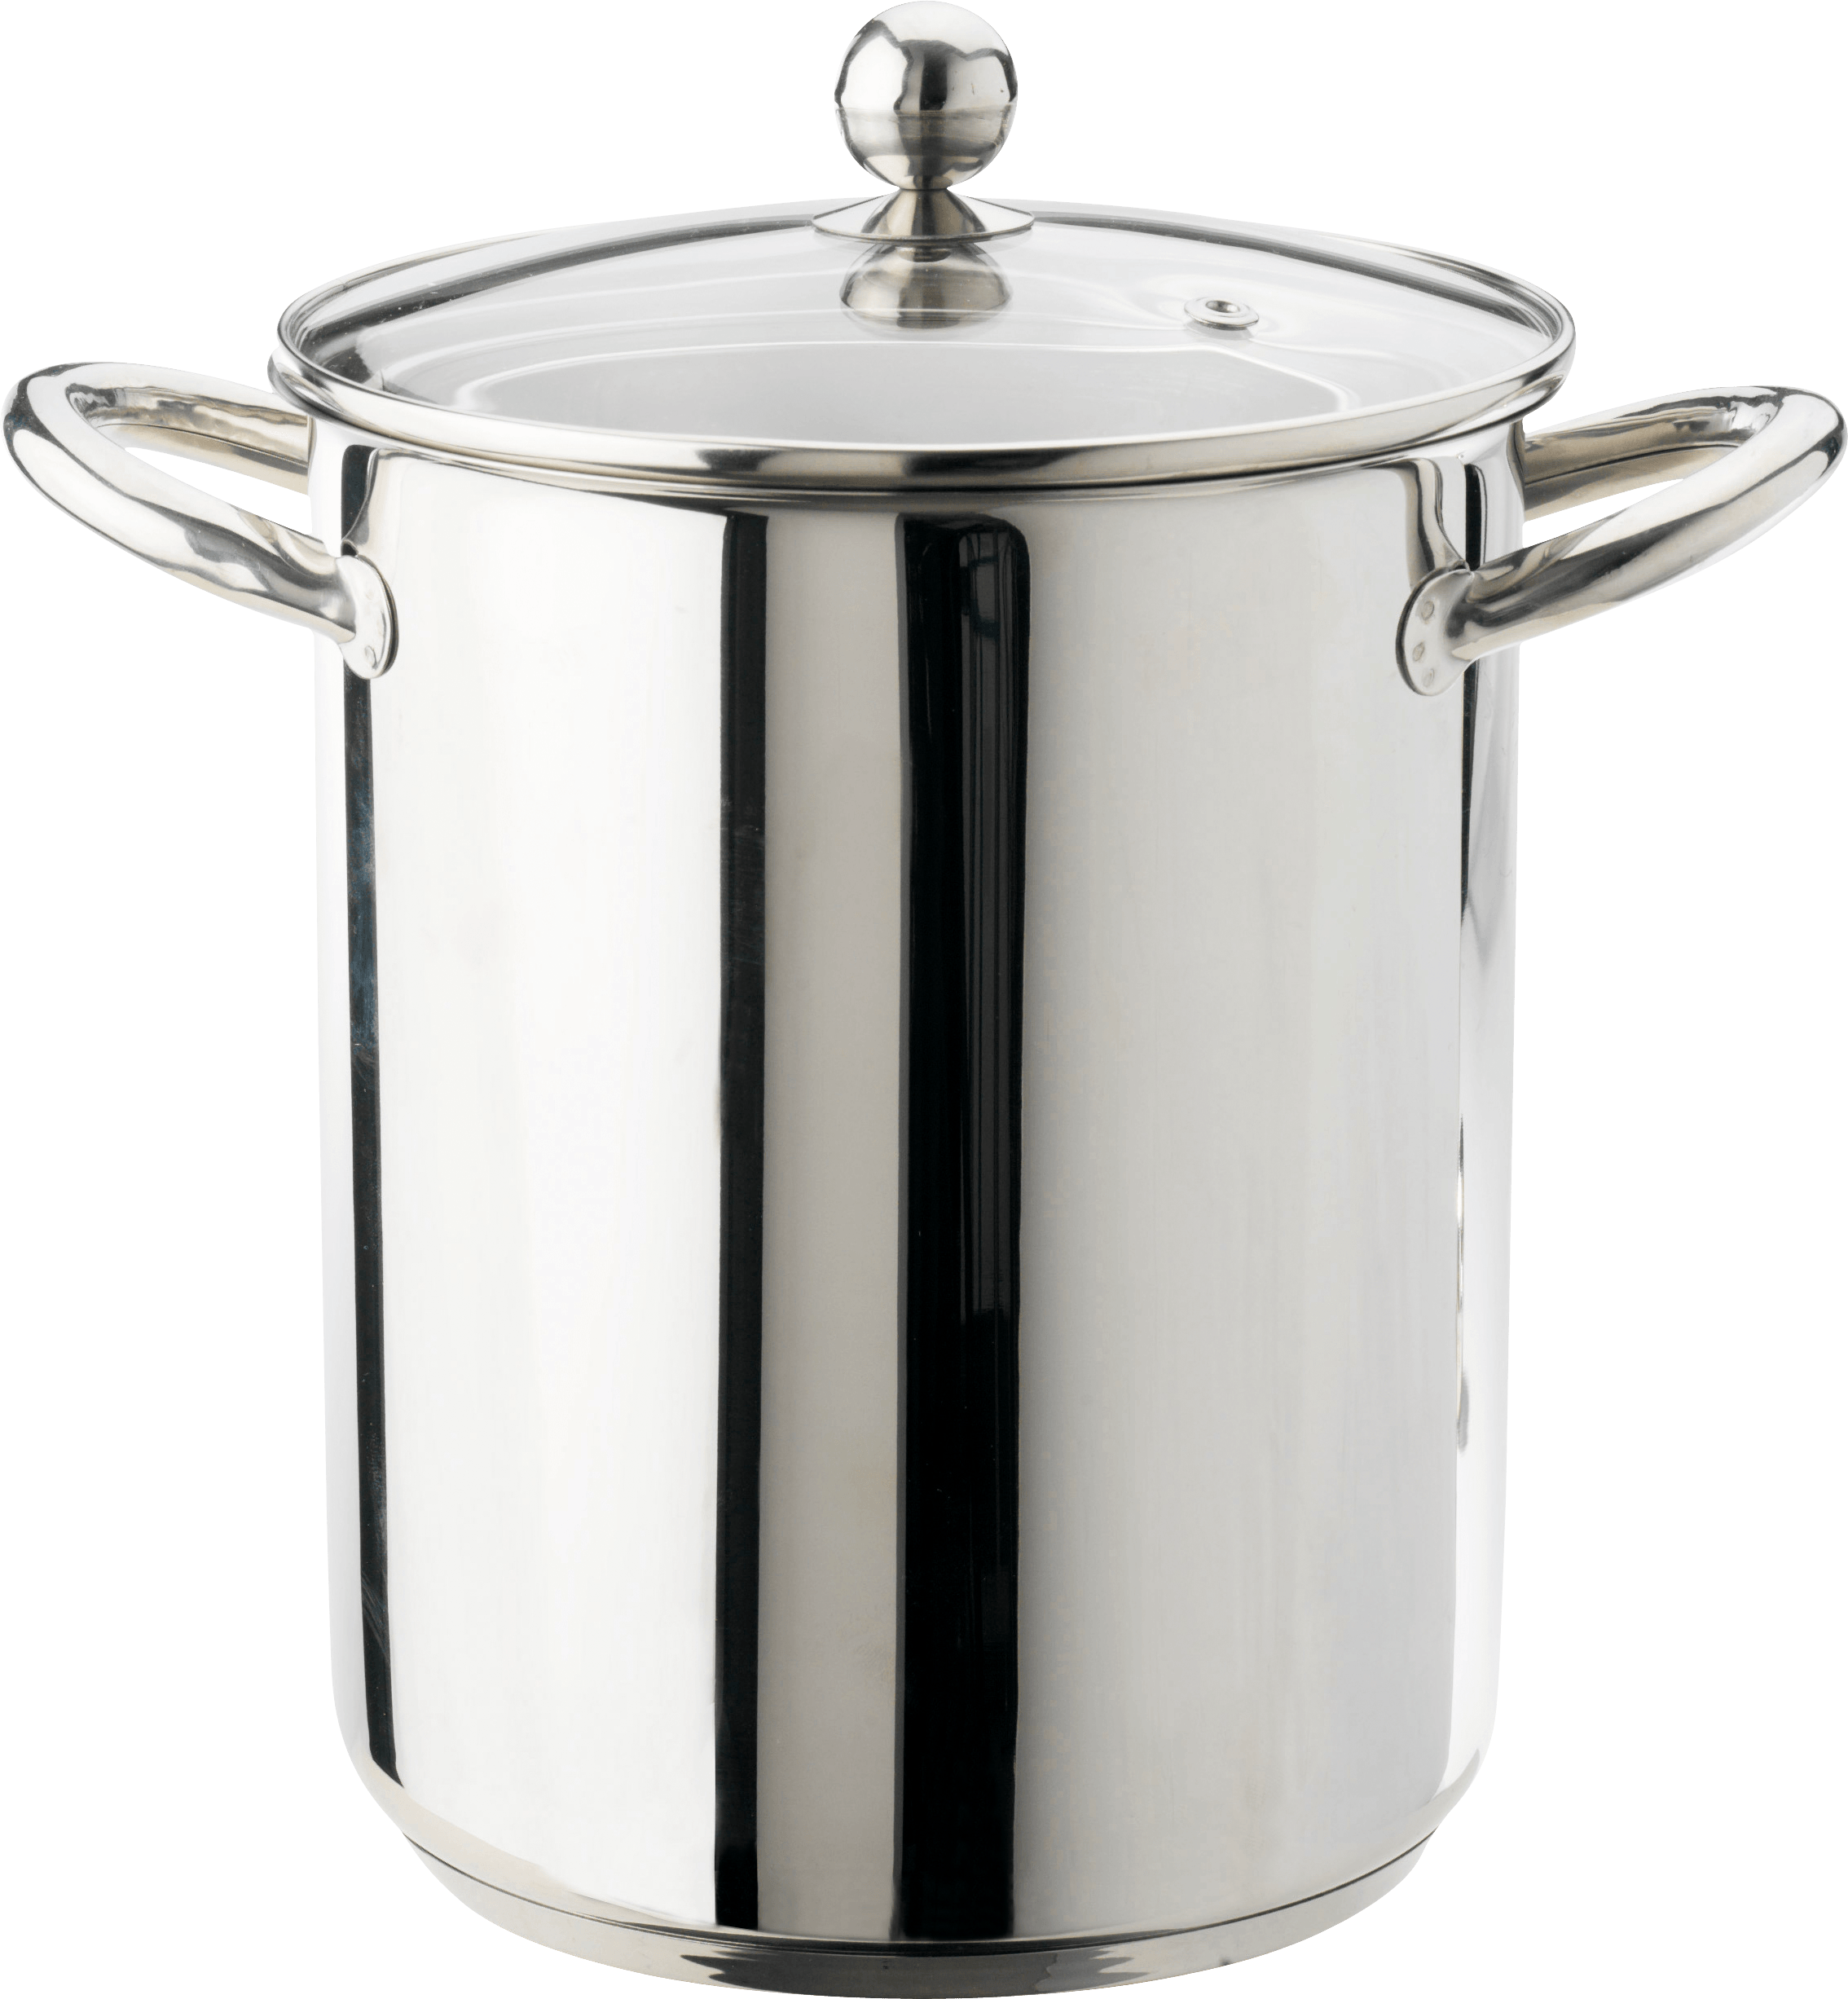 Cooking Pan PNG HD Quality